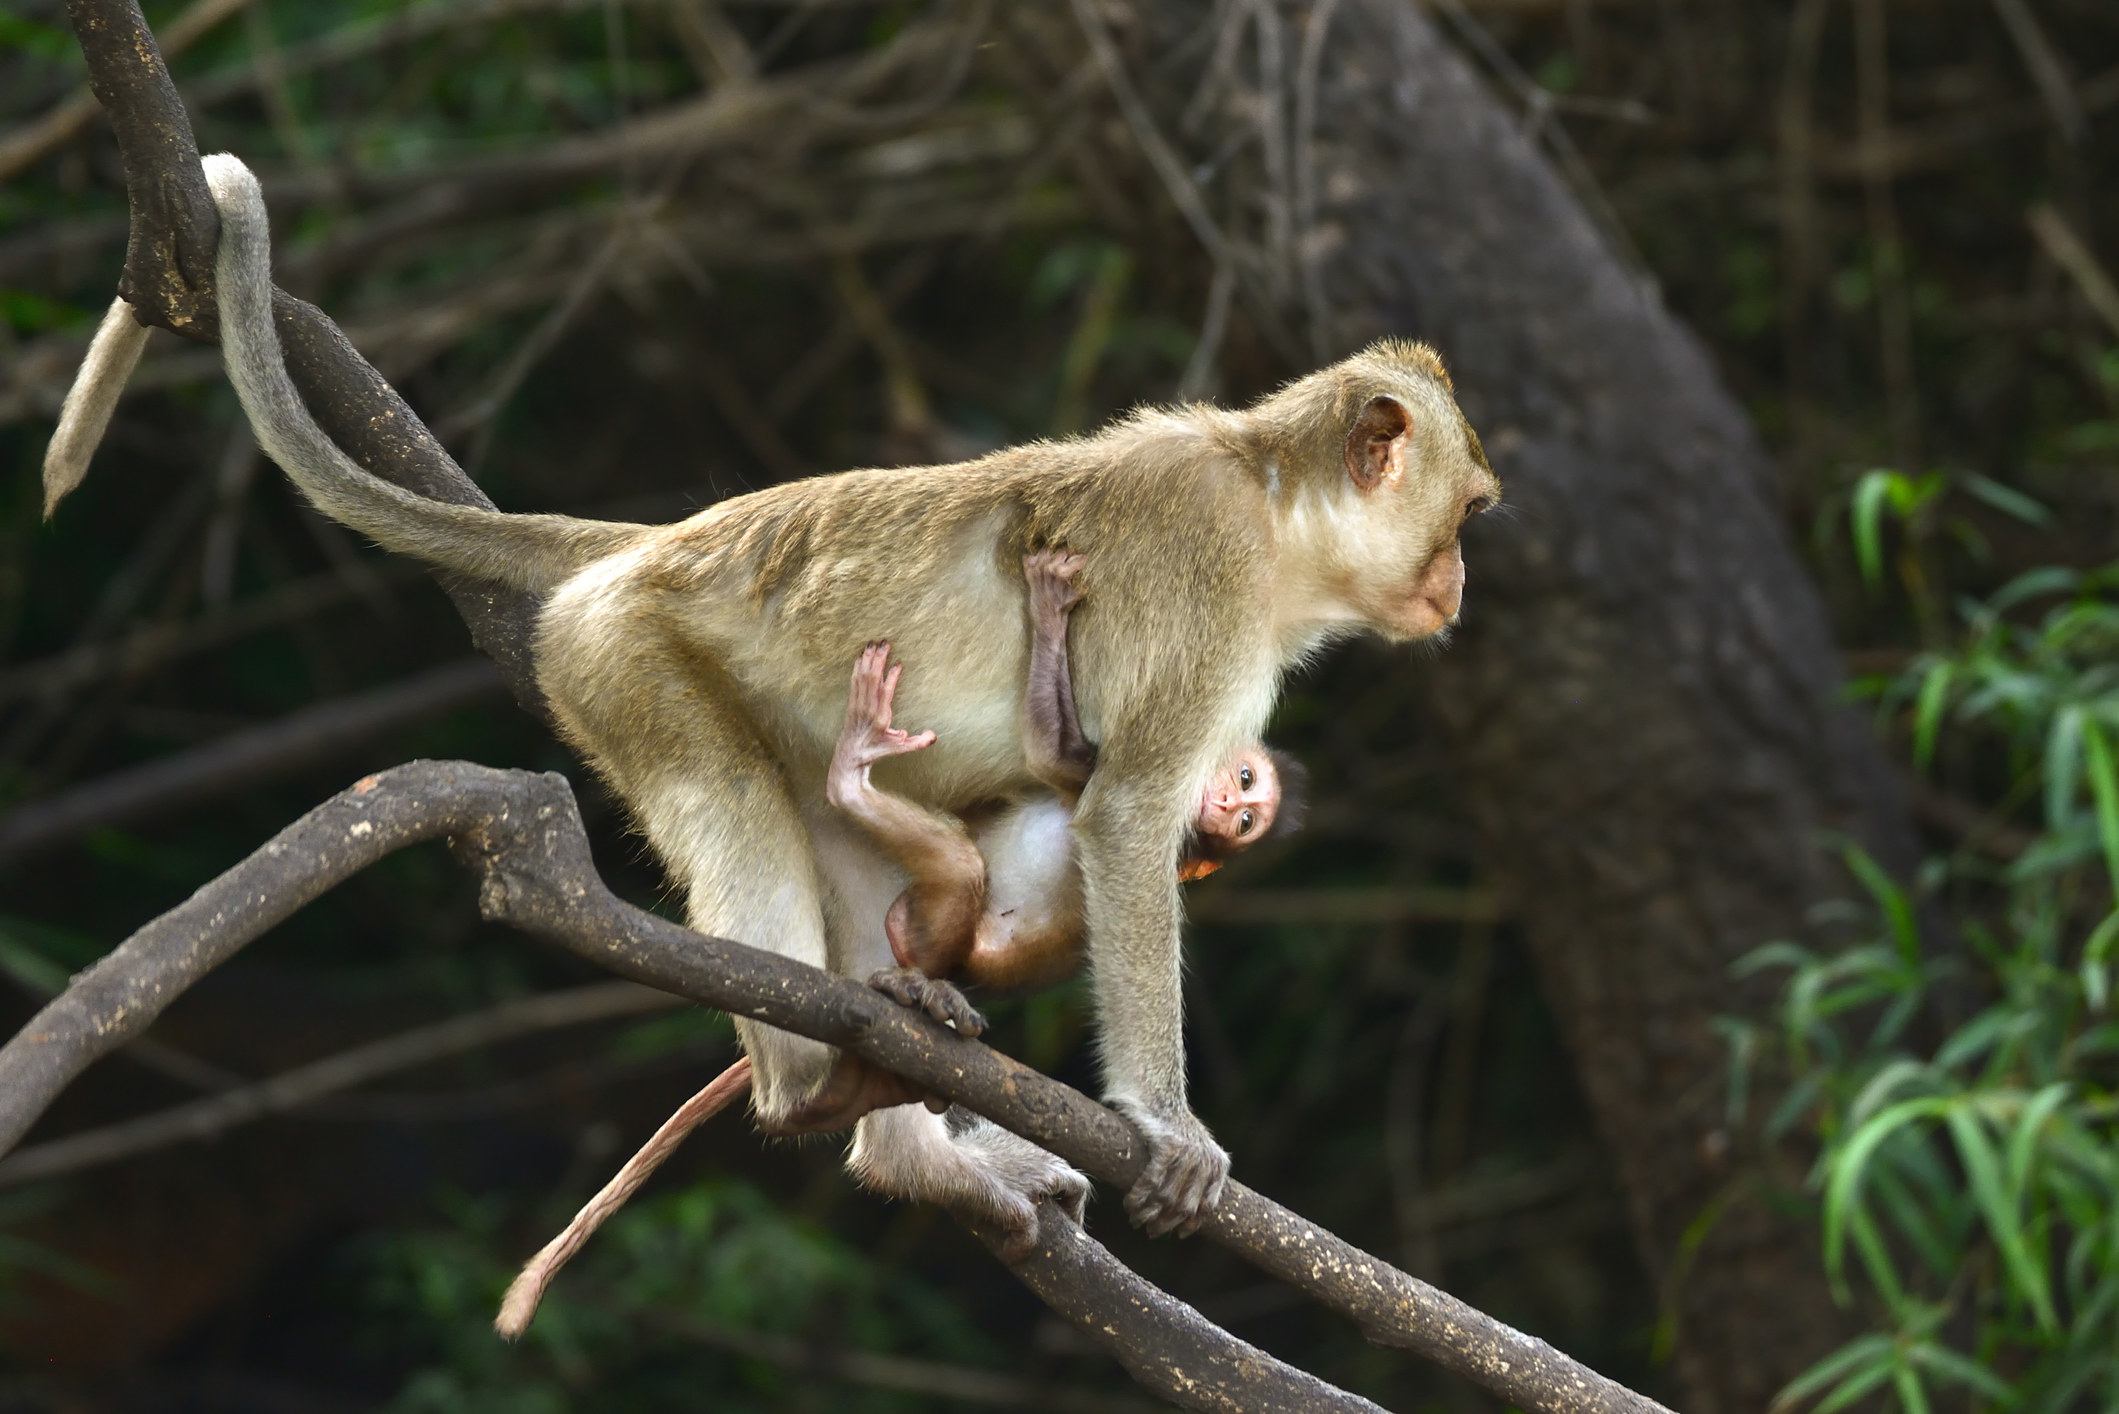 A baby monkey clutching its mother